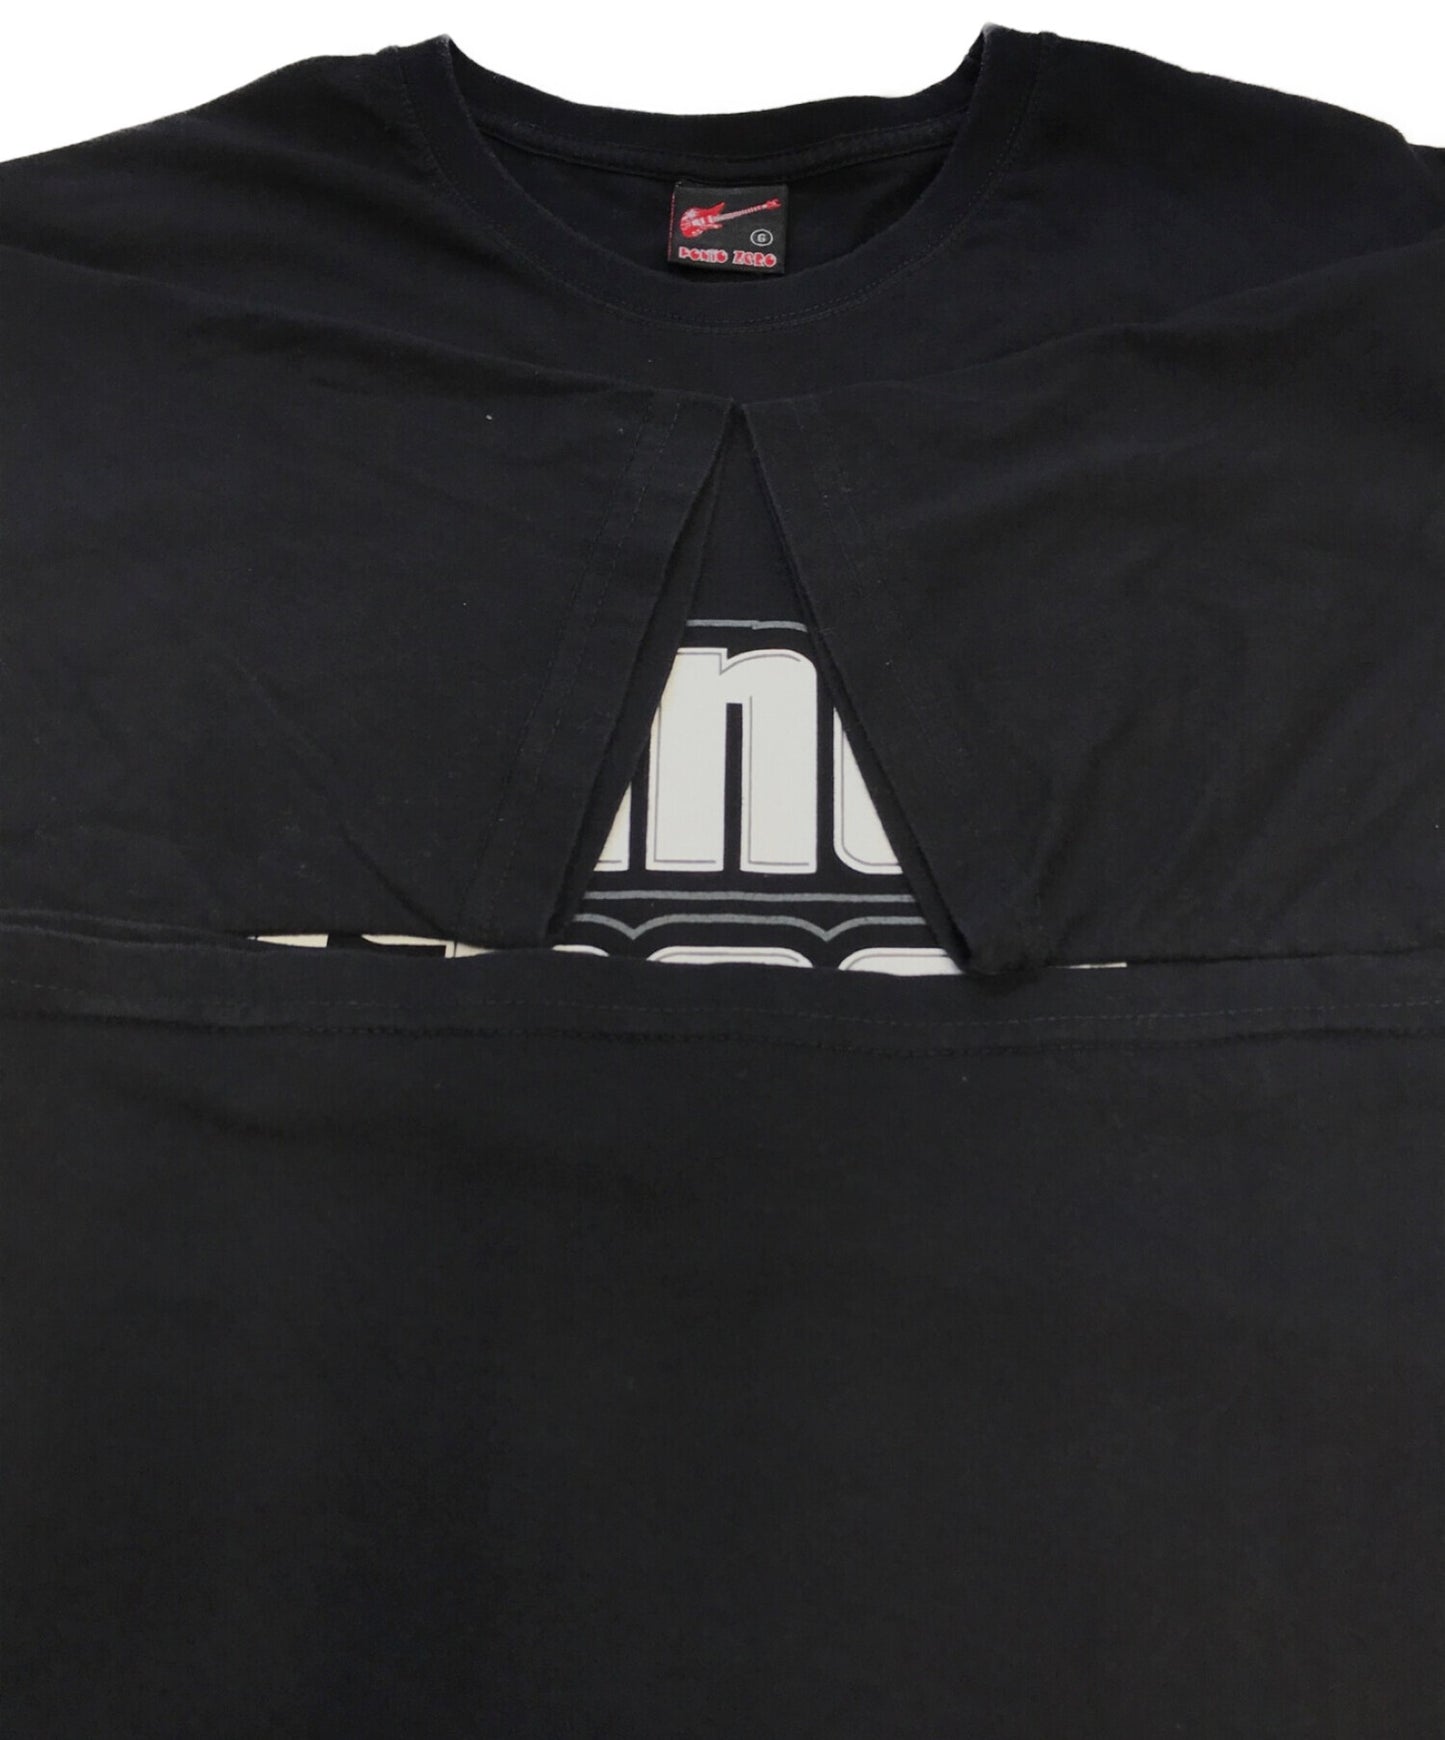 [Pre-owned] GRAND THEFT AUTO5 Game Tee